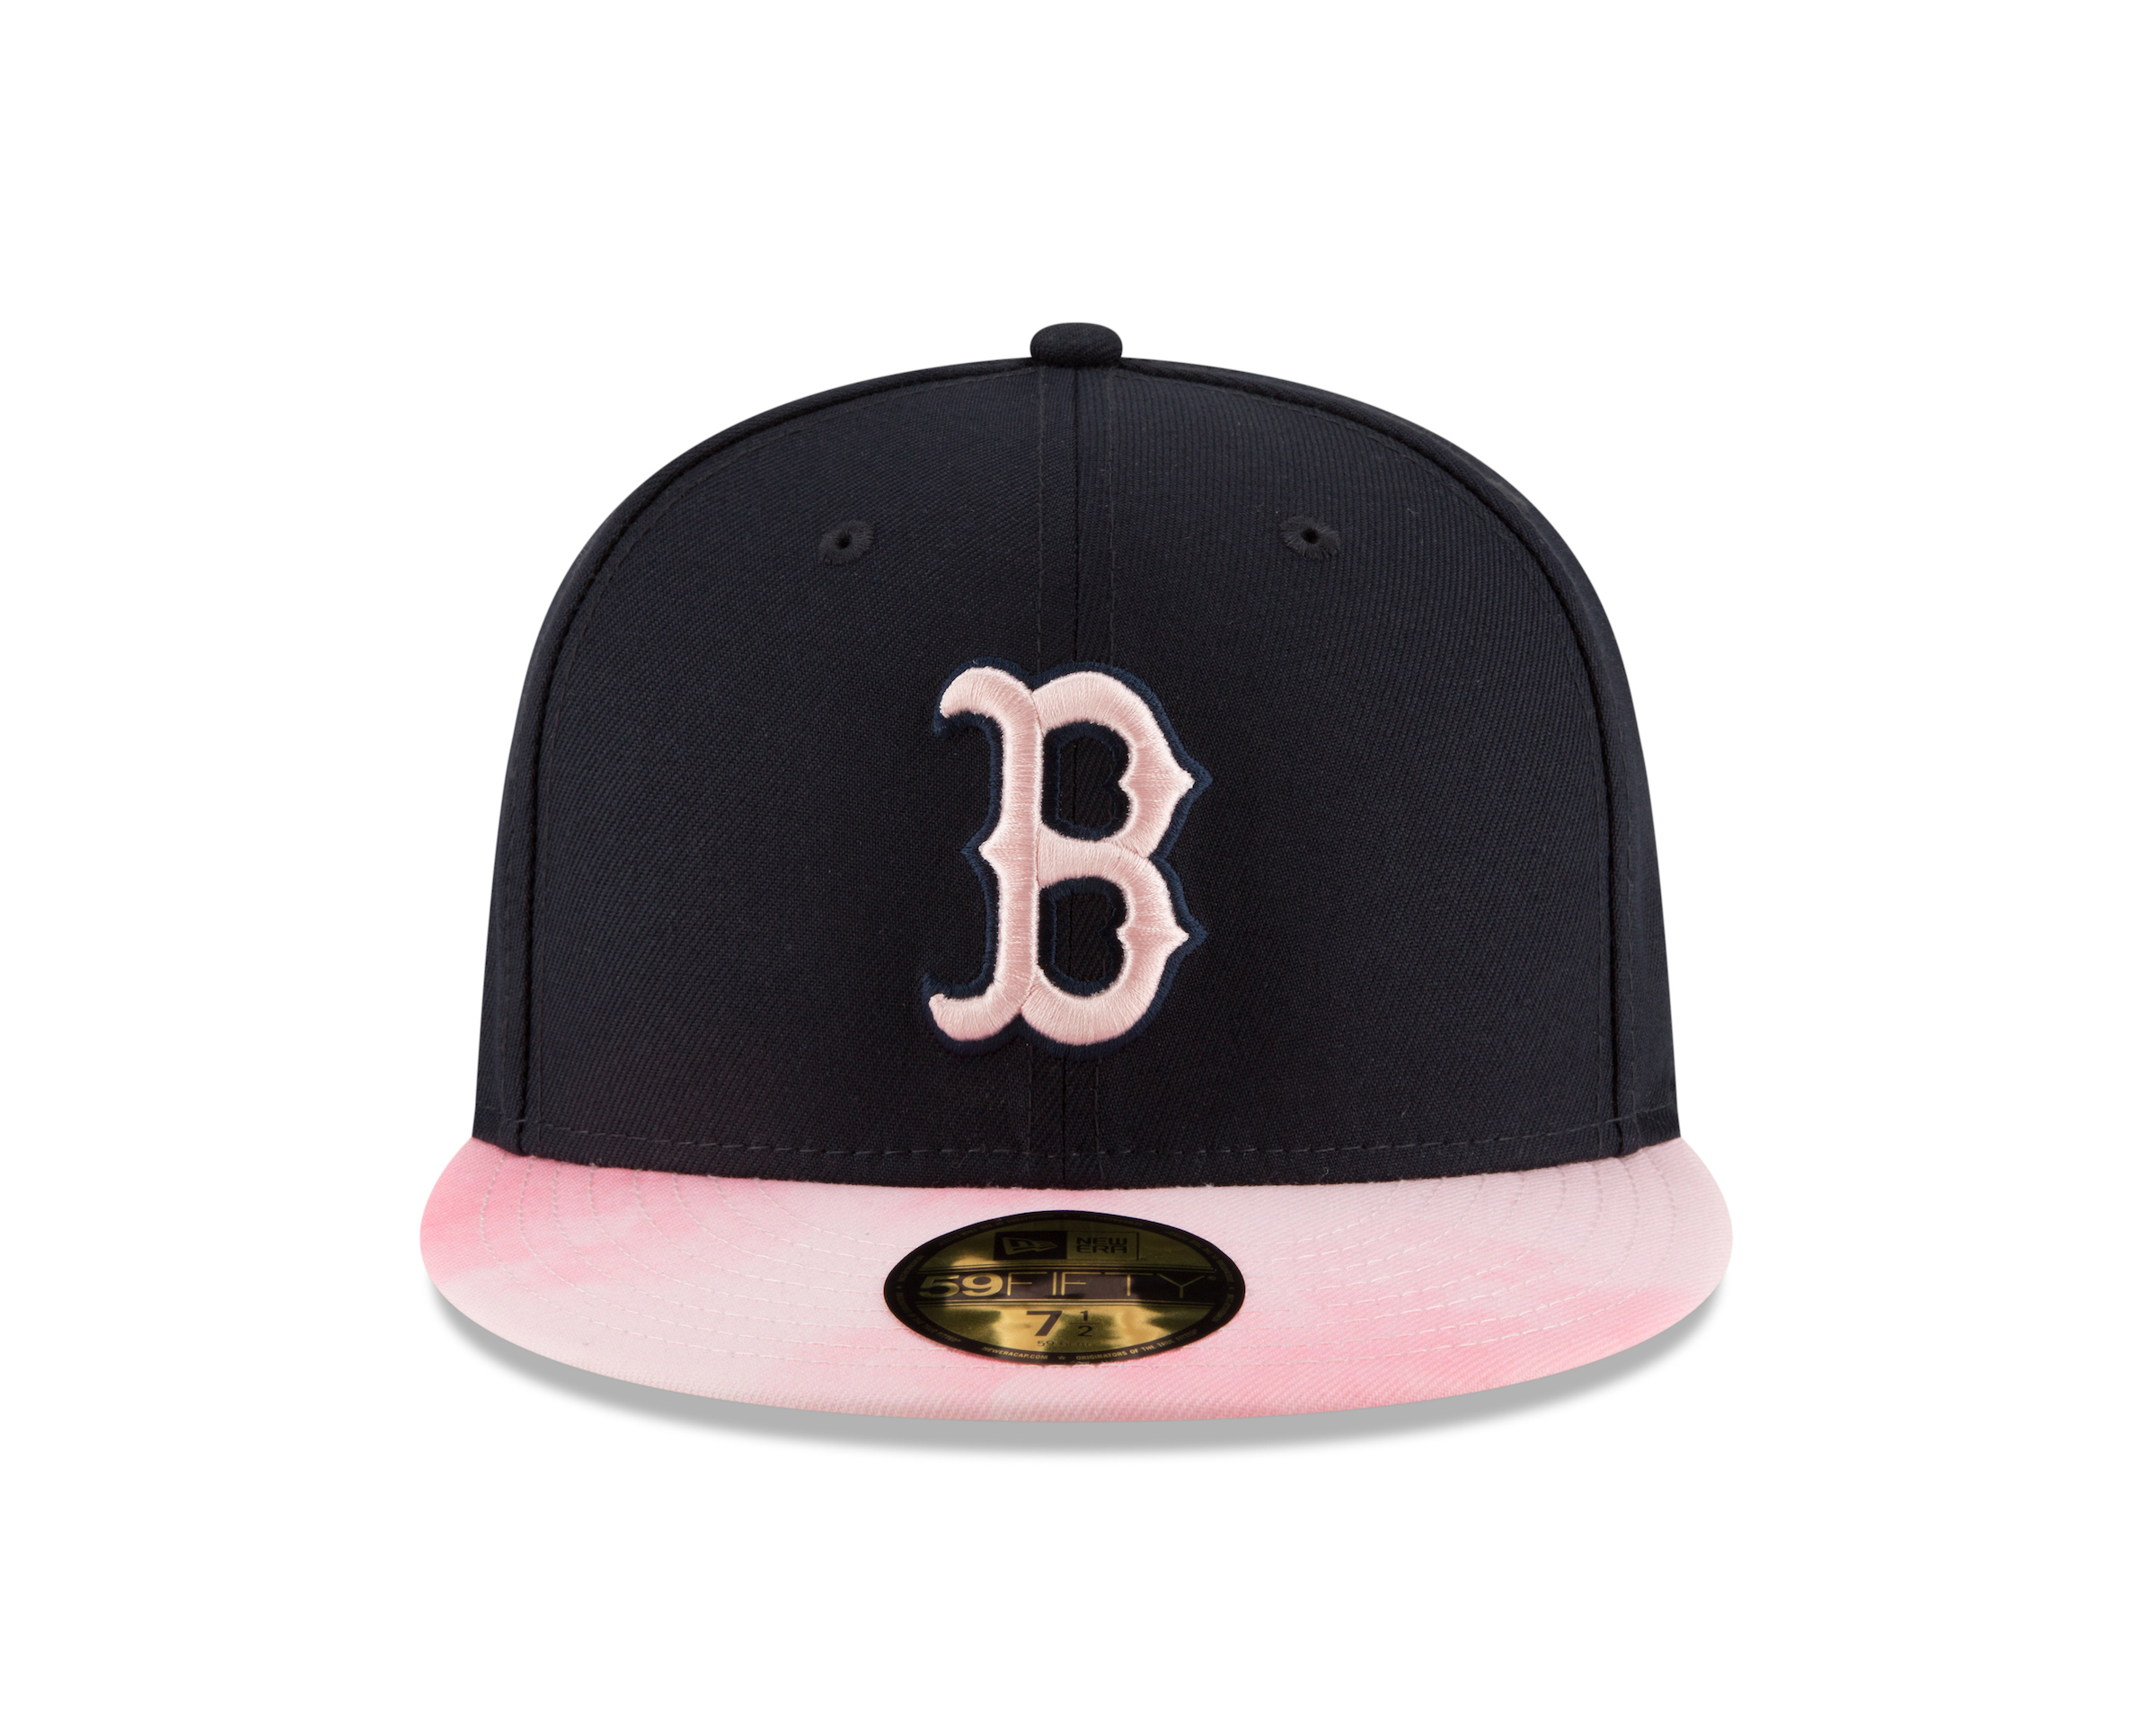 mlb mother's day uniforms 2019